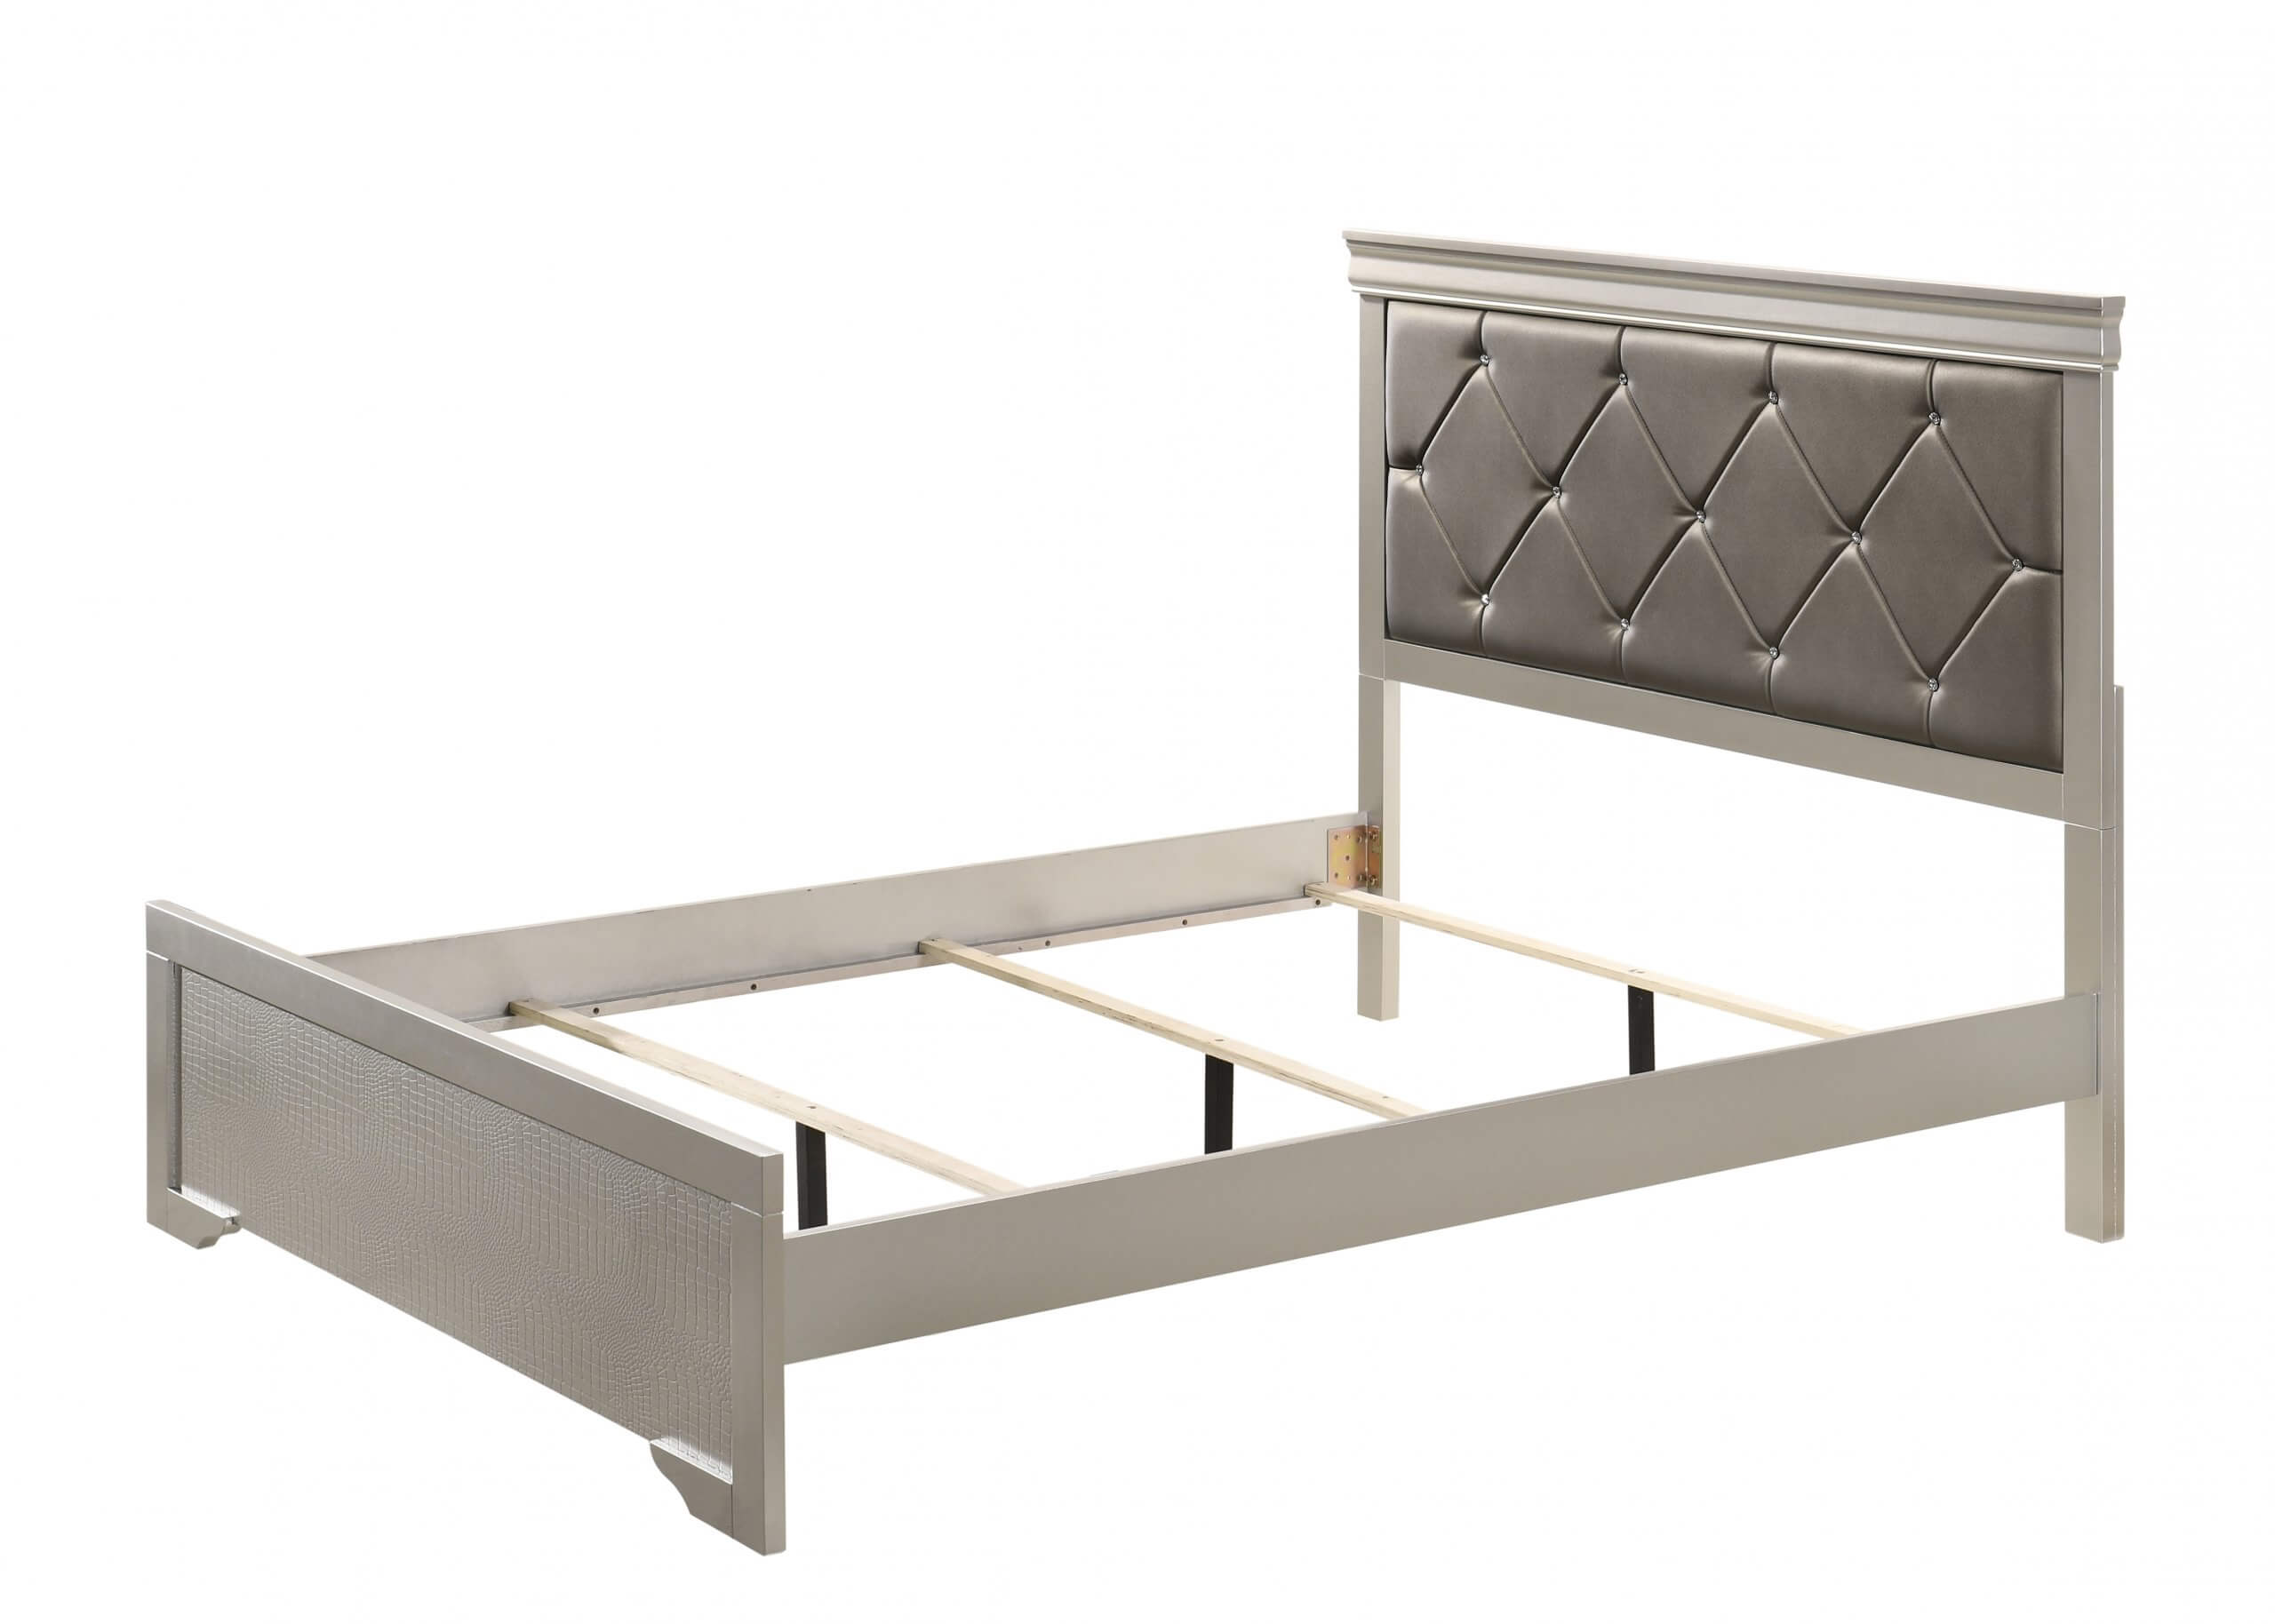 Amalia Silver King Sleigh Bed By Crown, Silver King Bed